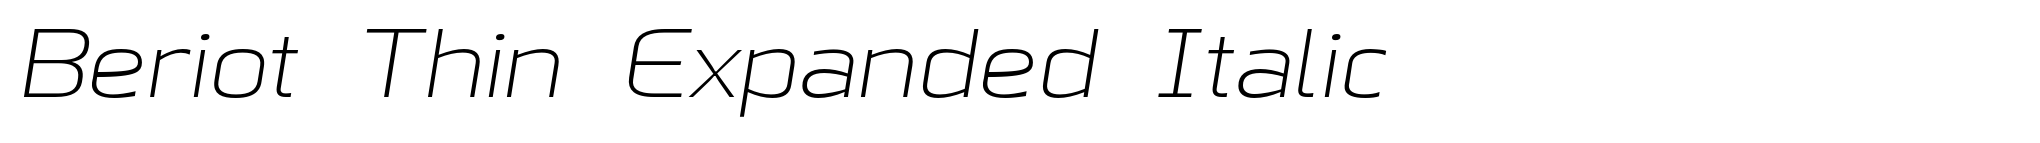 Beriot Thin Expanded Italic image